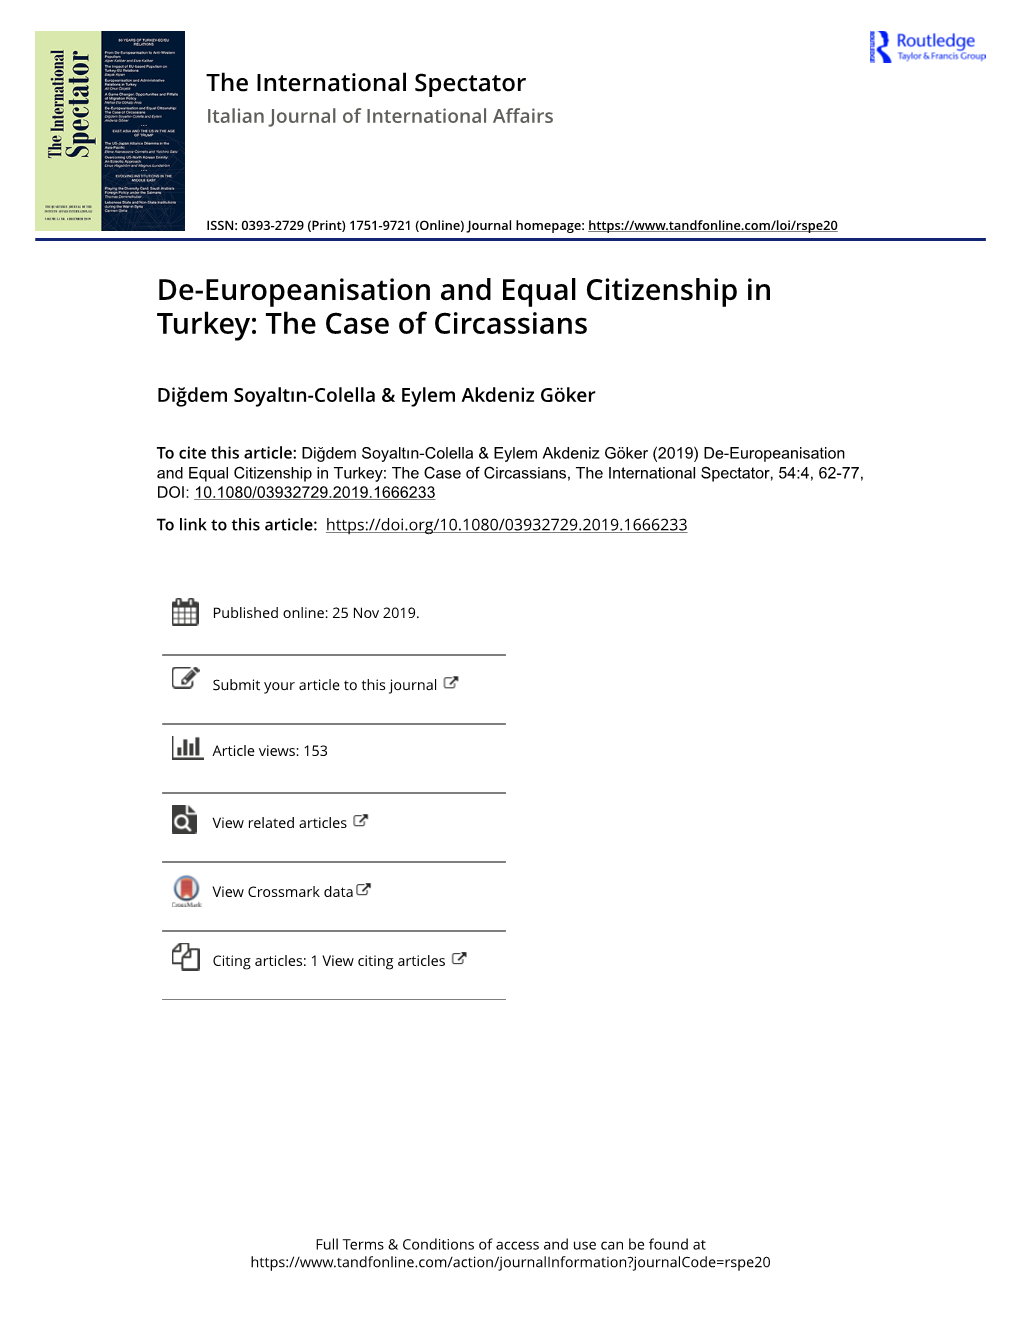 De-Europeanisation and Equal Citizenship in Turkey: the Case of Circassians